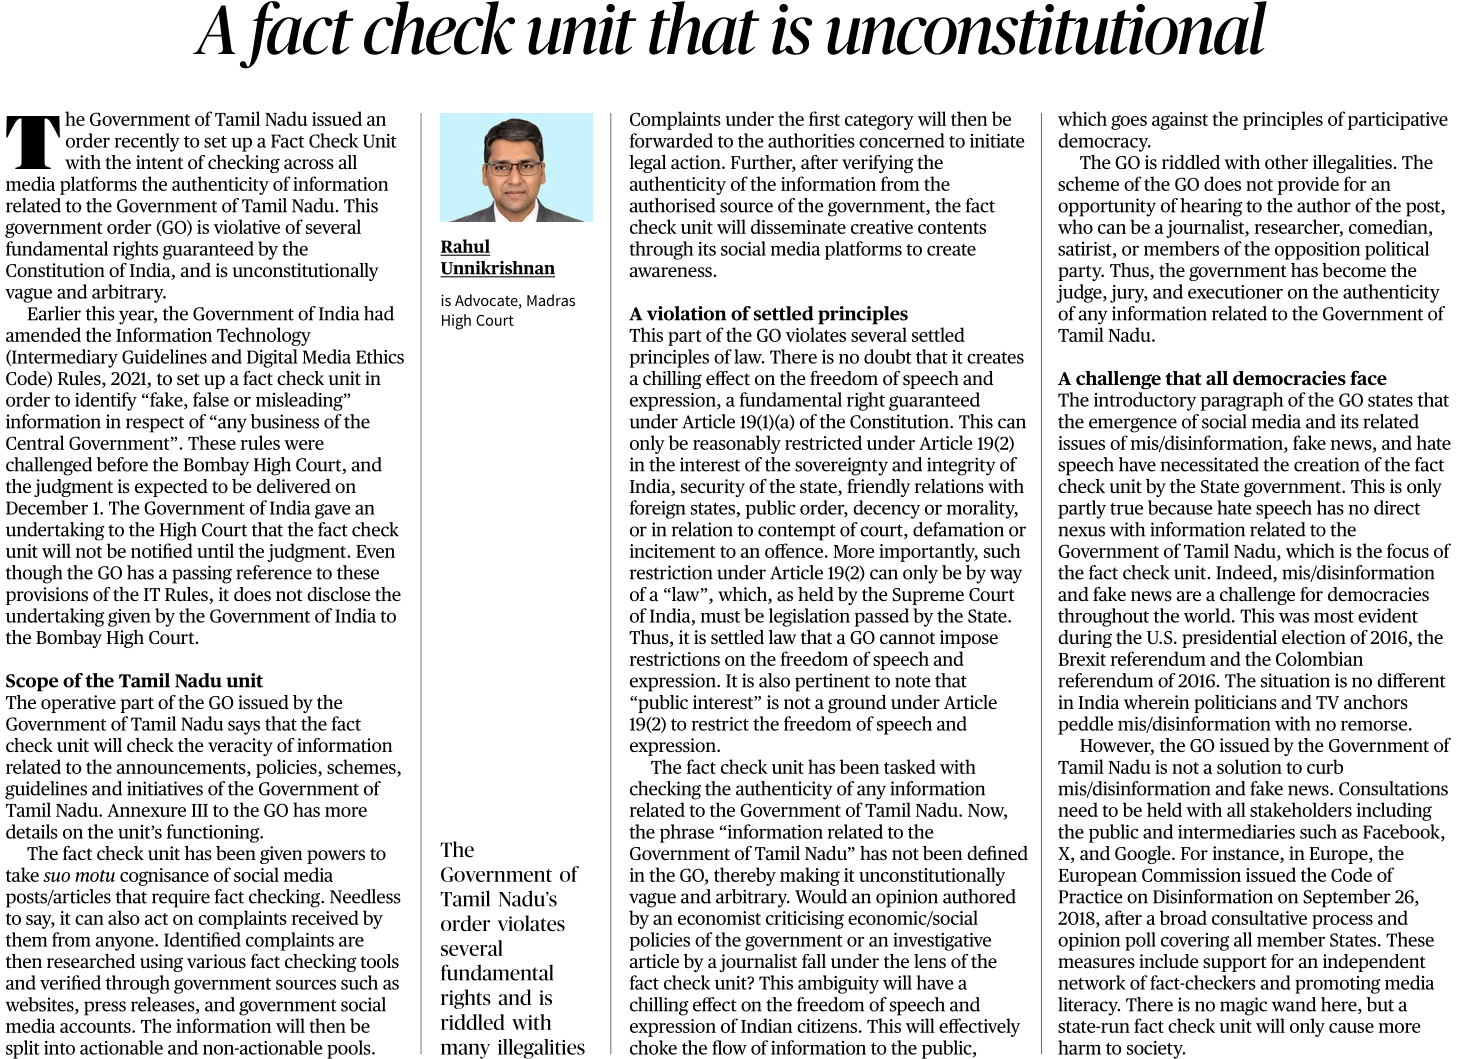 A fact check unit that is unconstitutional - Page No.6, GS 2